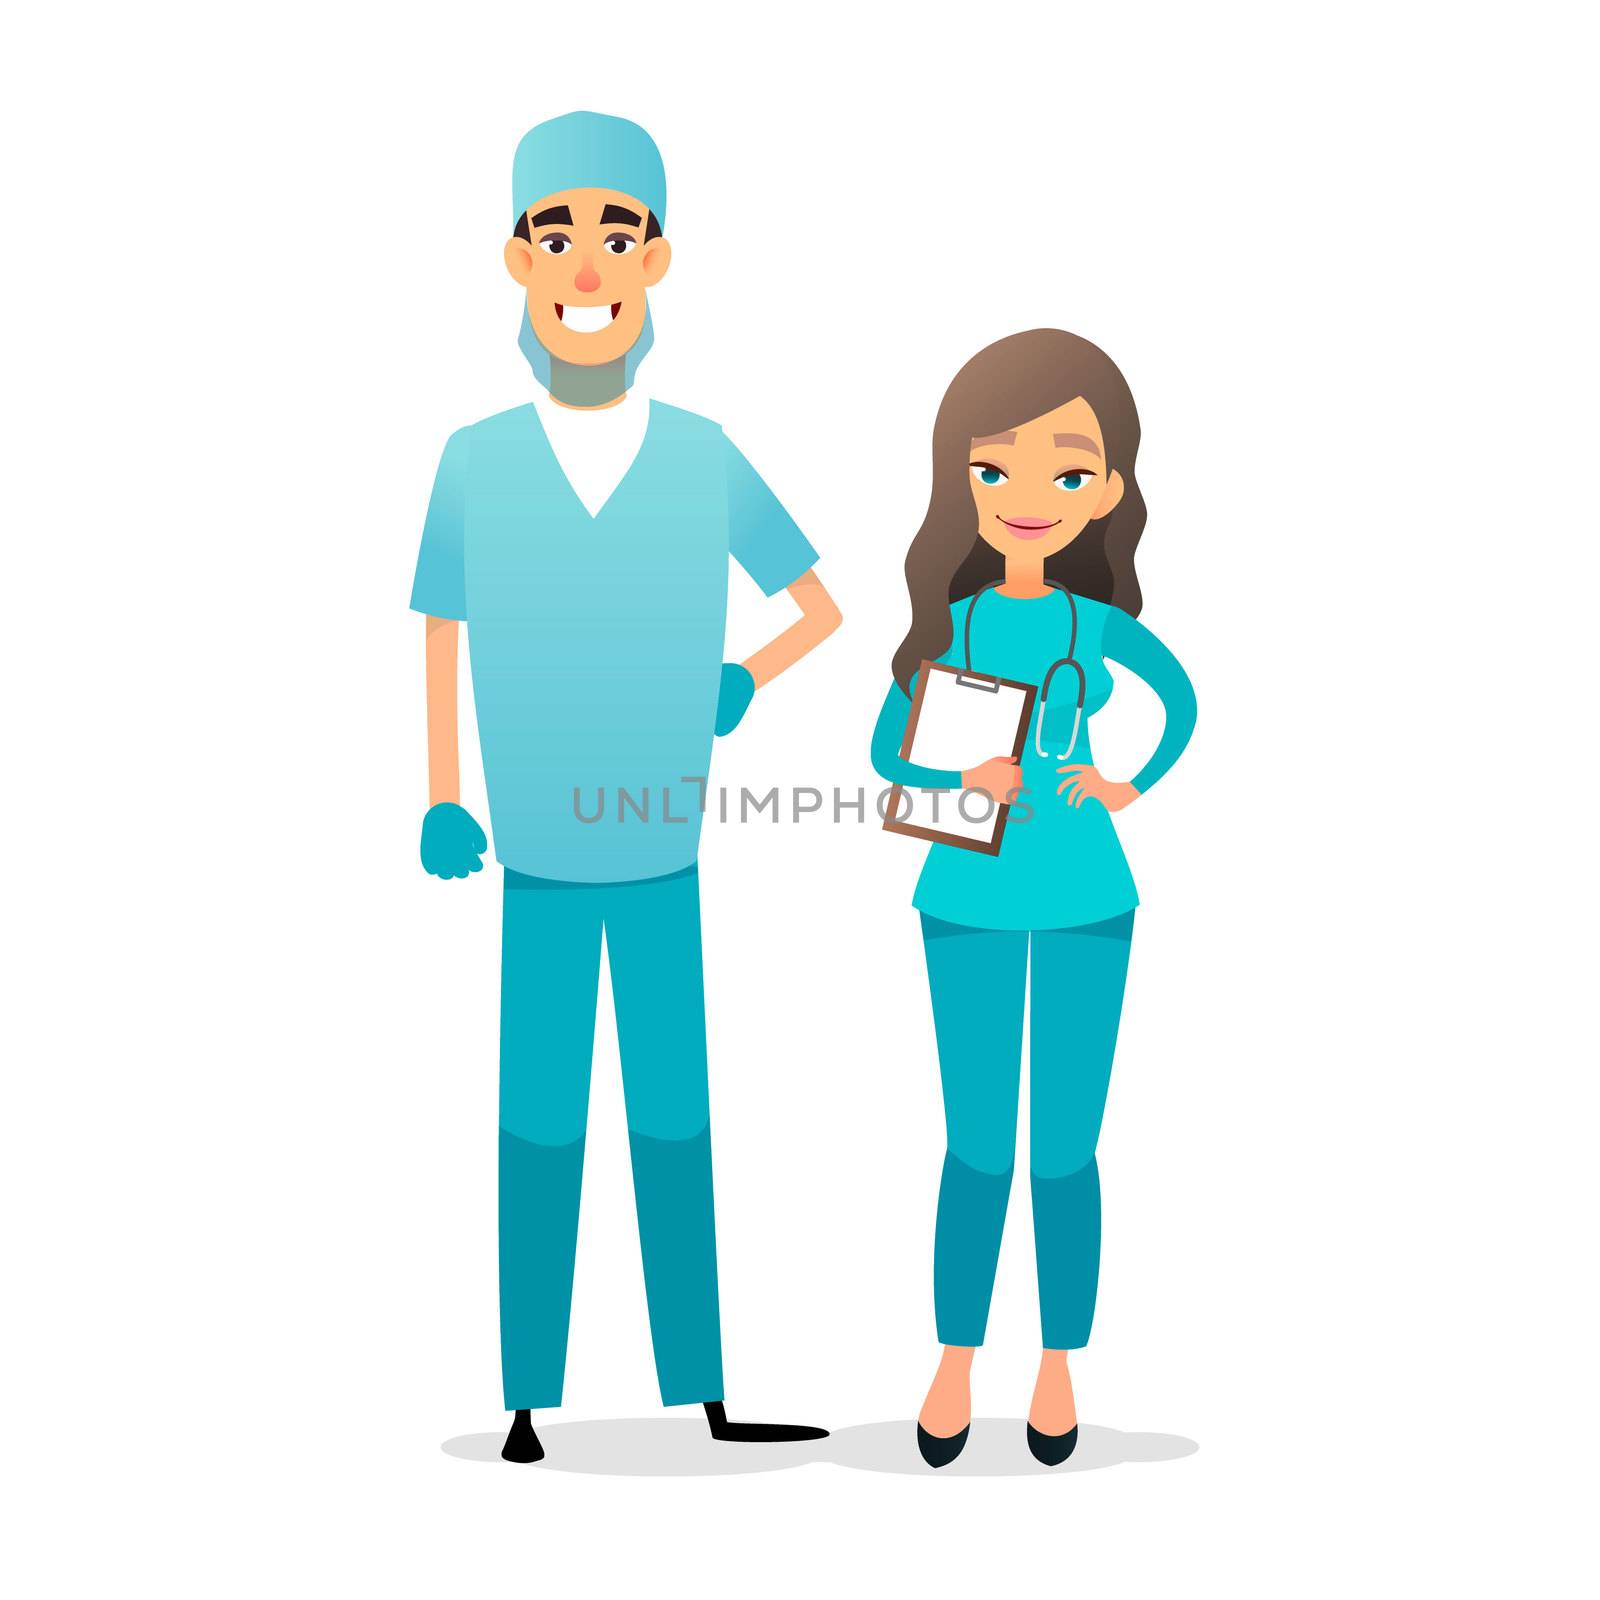 Doctor and nurse team. Cartoon medical staff. Medical team concept. Surgeon, nurse on hospital. Professional health workers. Flat characters isolated on white. by Elena_Garder